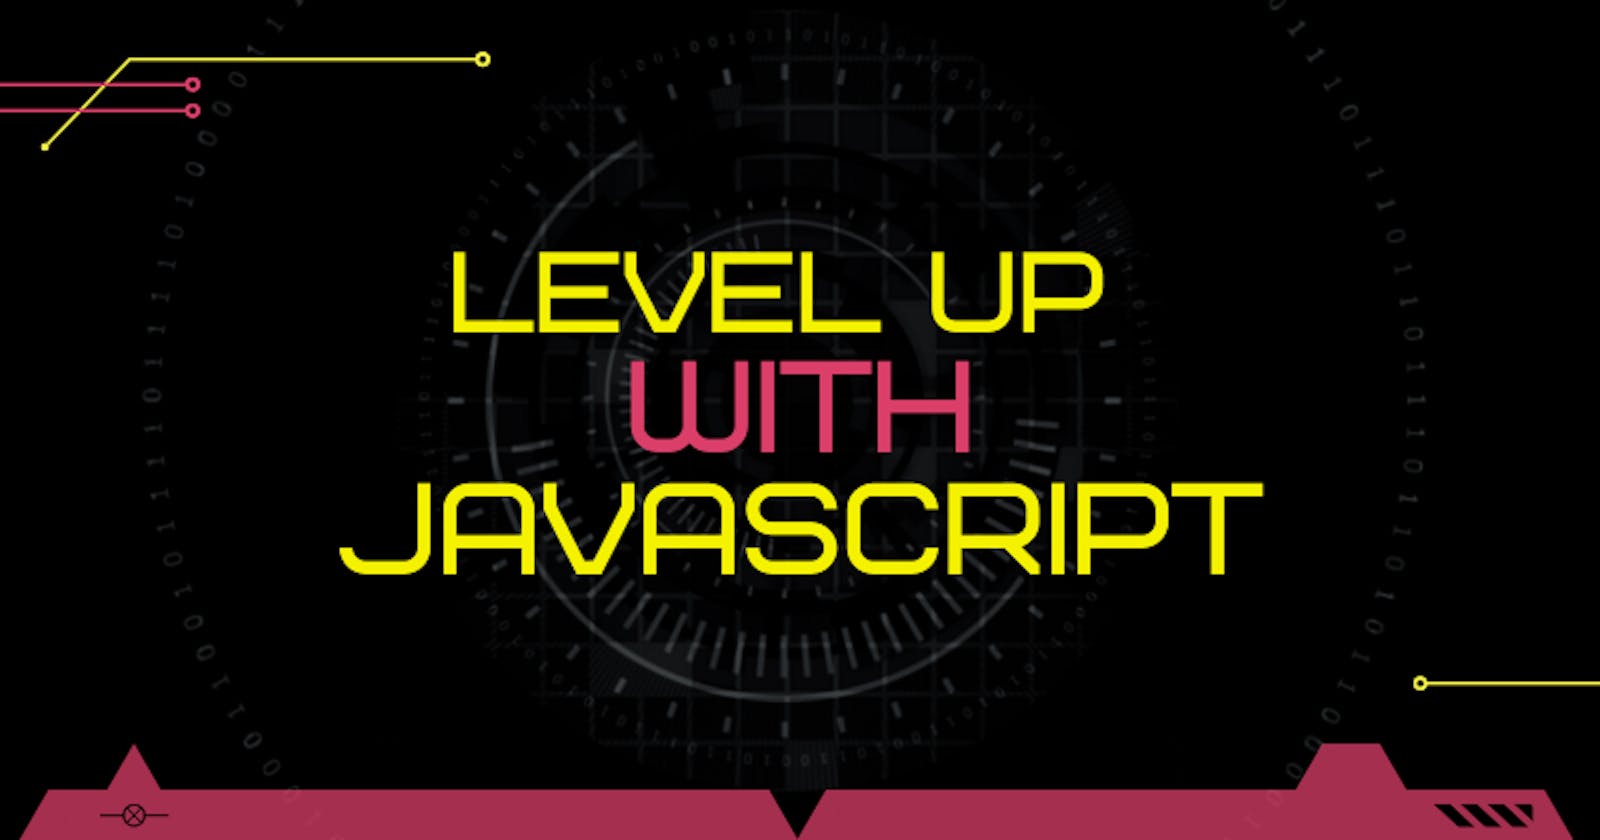 LEVEL UP with JavaScript! LVL 6